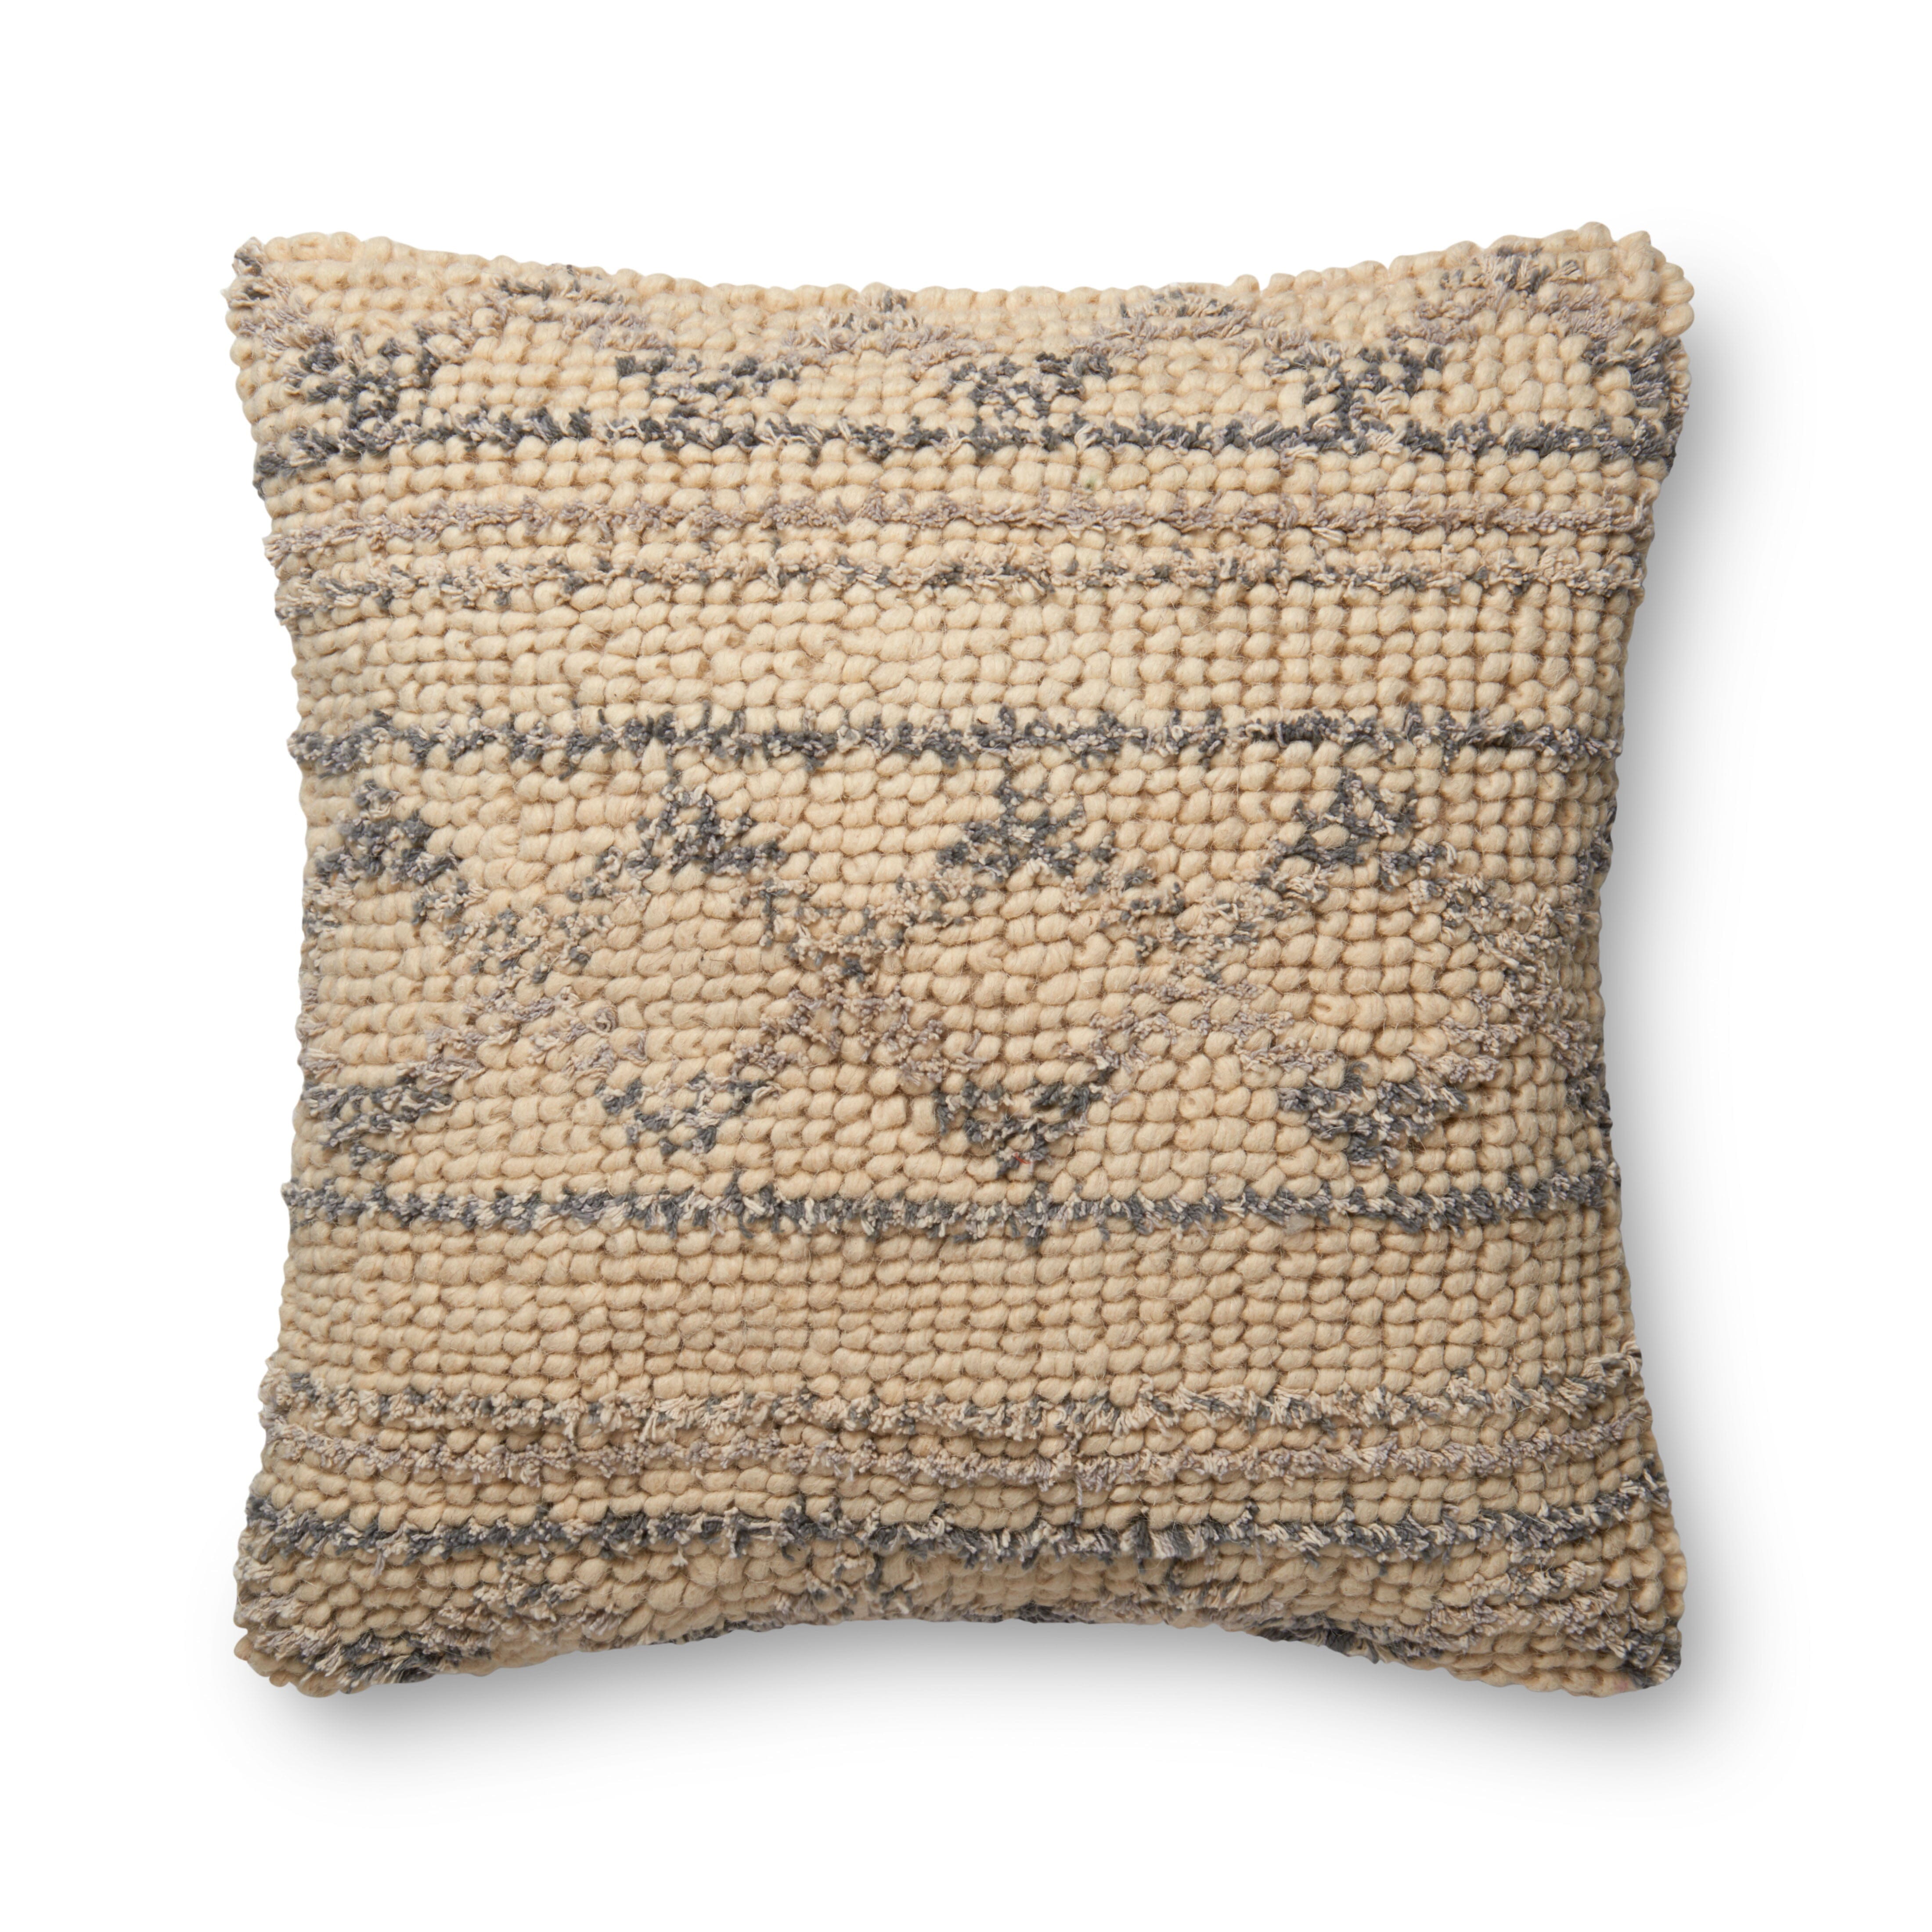 ED Ellen DeGeneres Crafted by Loloi Pillow | Blue / Natural ED Ellen DeGeneres Crafted by Loloi